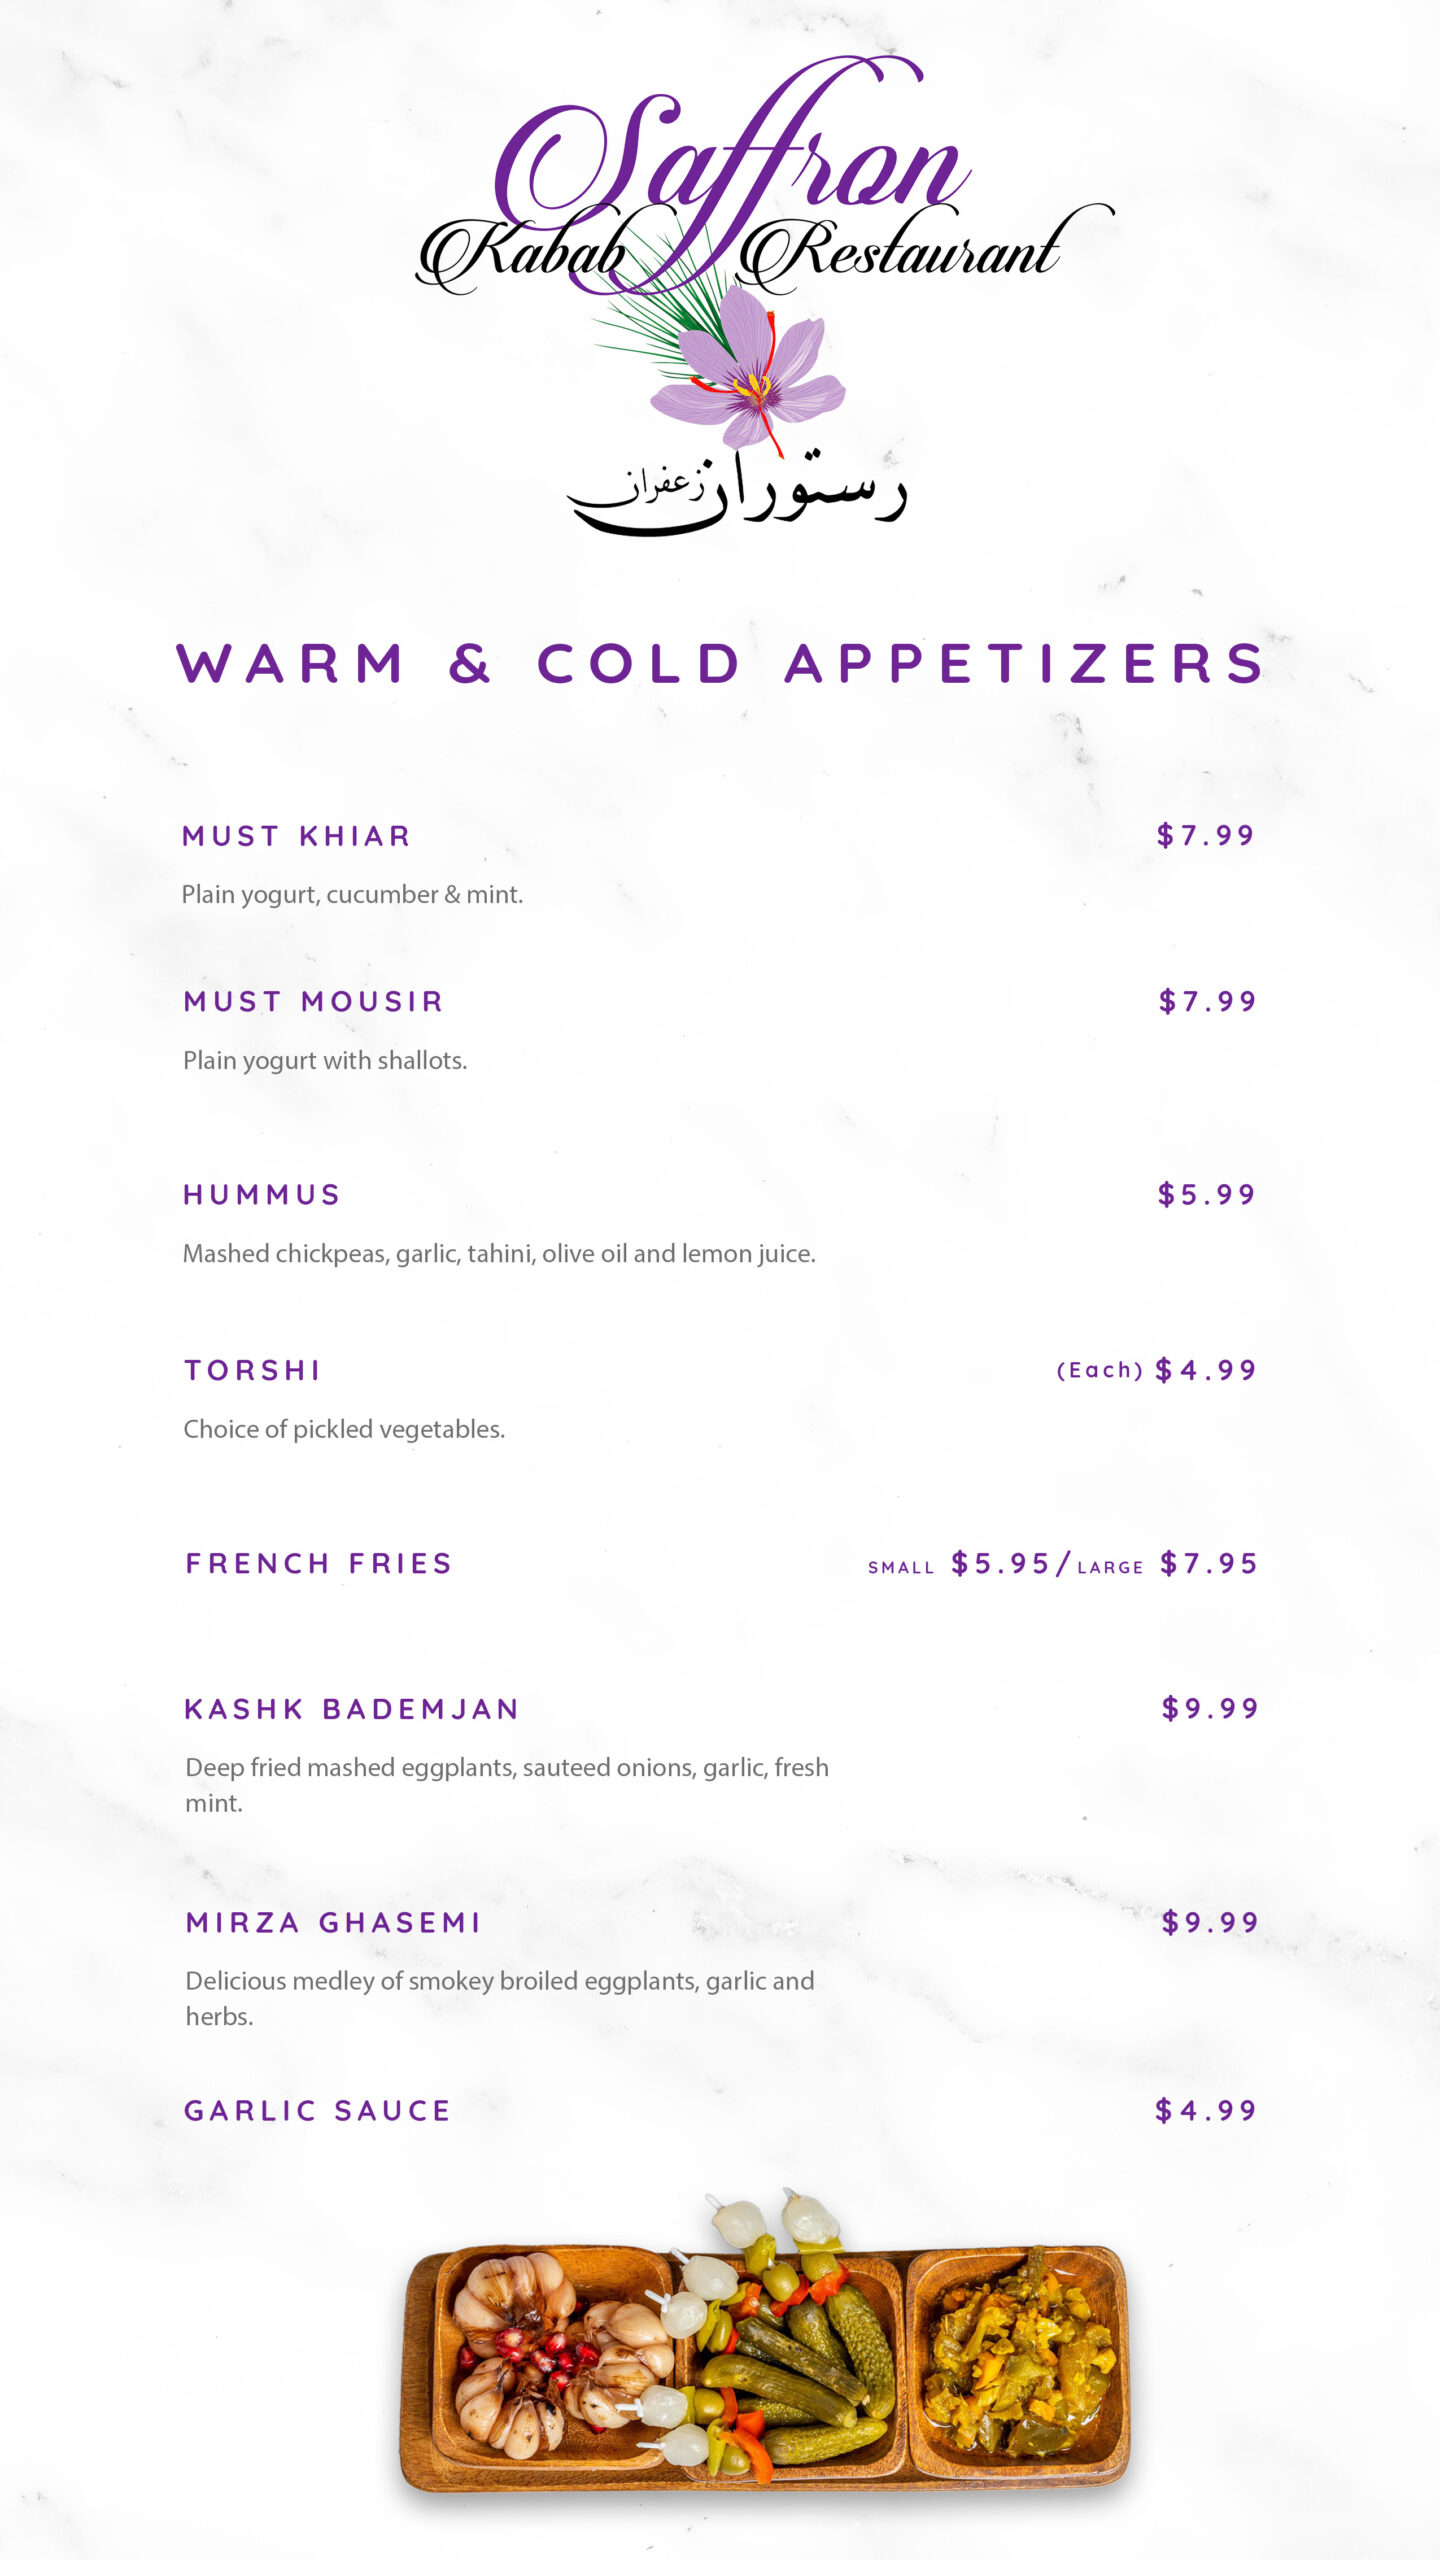 warm & cold appetizers v2 copy